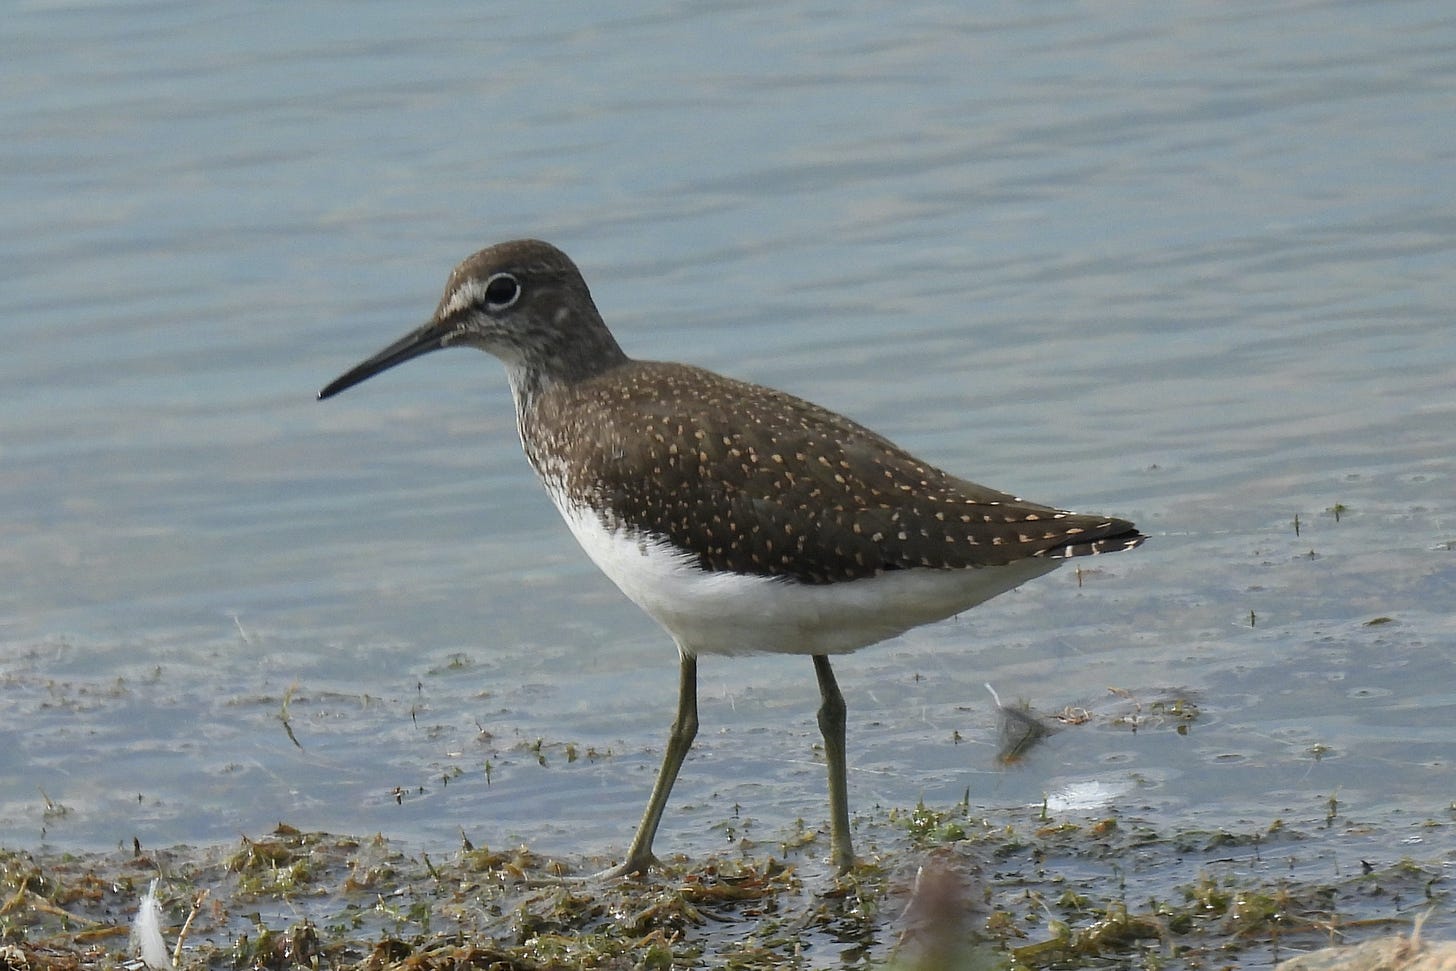 A wading bird at the edge of a lake. The bird is mottled brown above and white below.